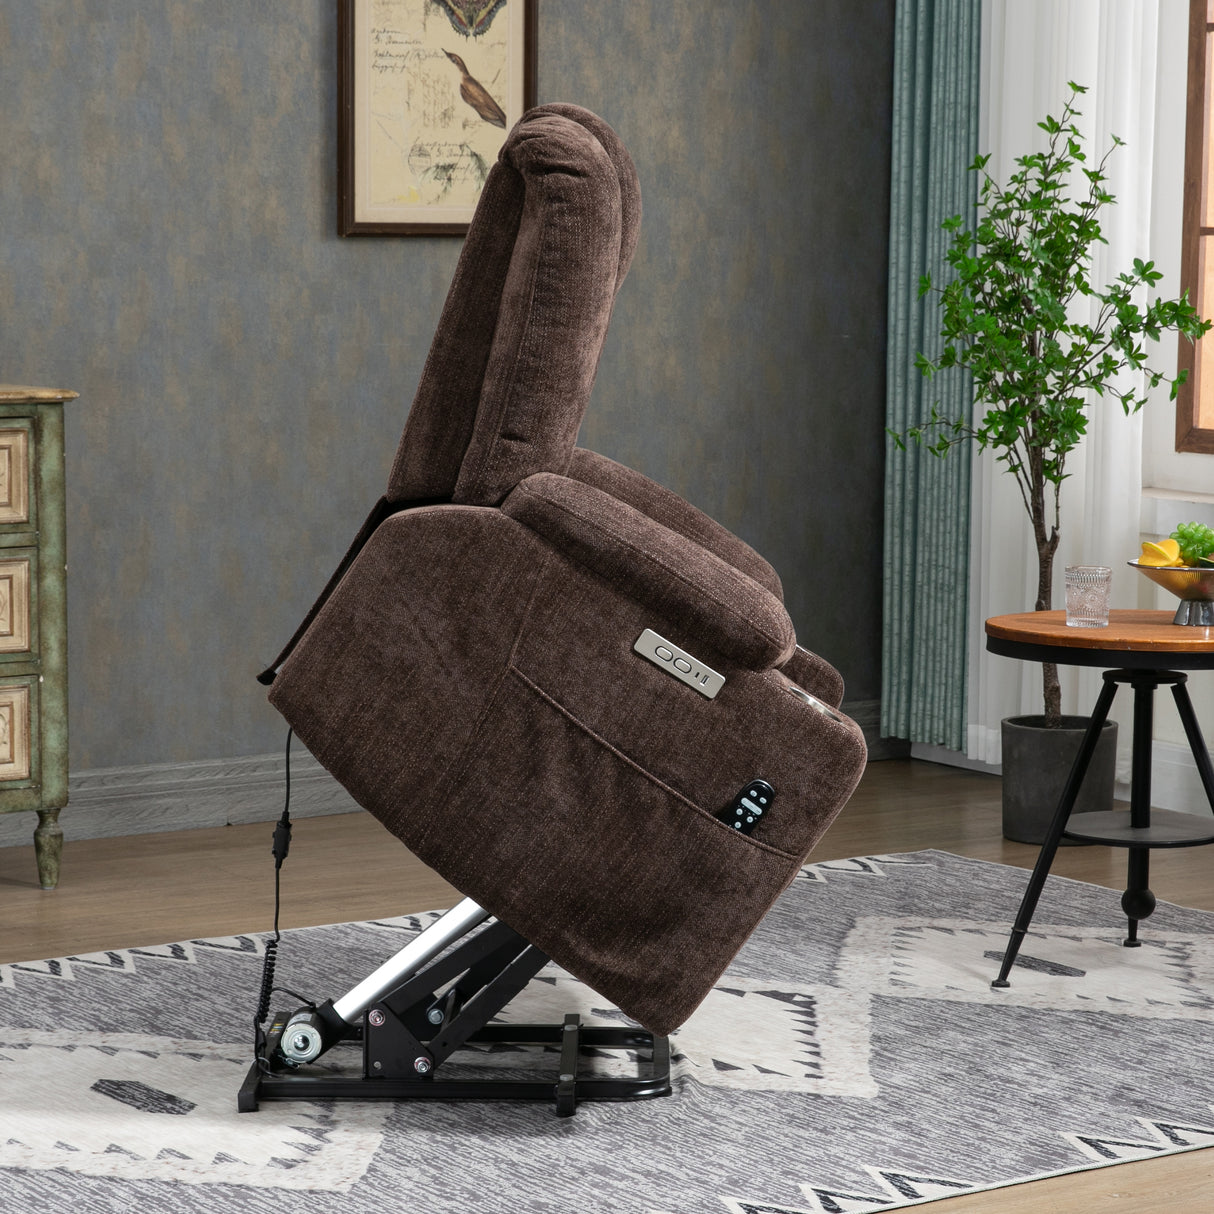 EMON'S Large Power Lift Recliner Chair with Massage and Heat for Elderly, Overstuffed Wide Recliners, Heavy Duty Motion Mechanism with USB and Type C Ports, 2 Steel Cup Holders, Brown Home Elegance USA